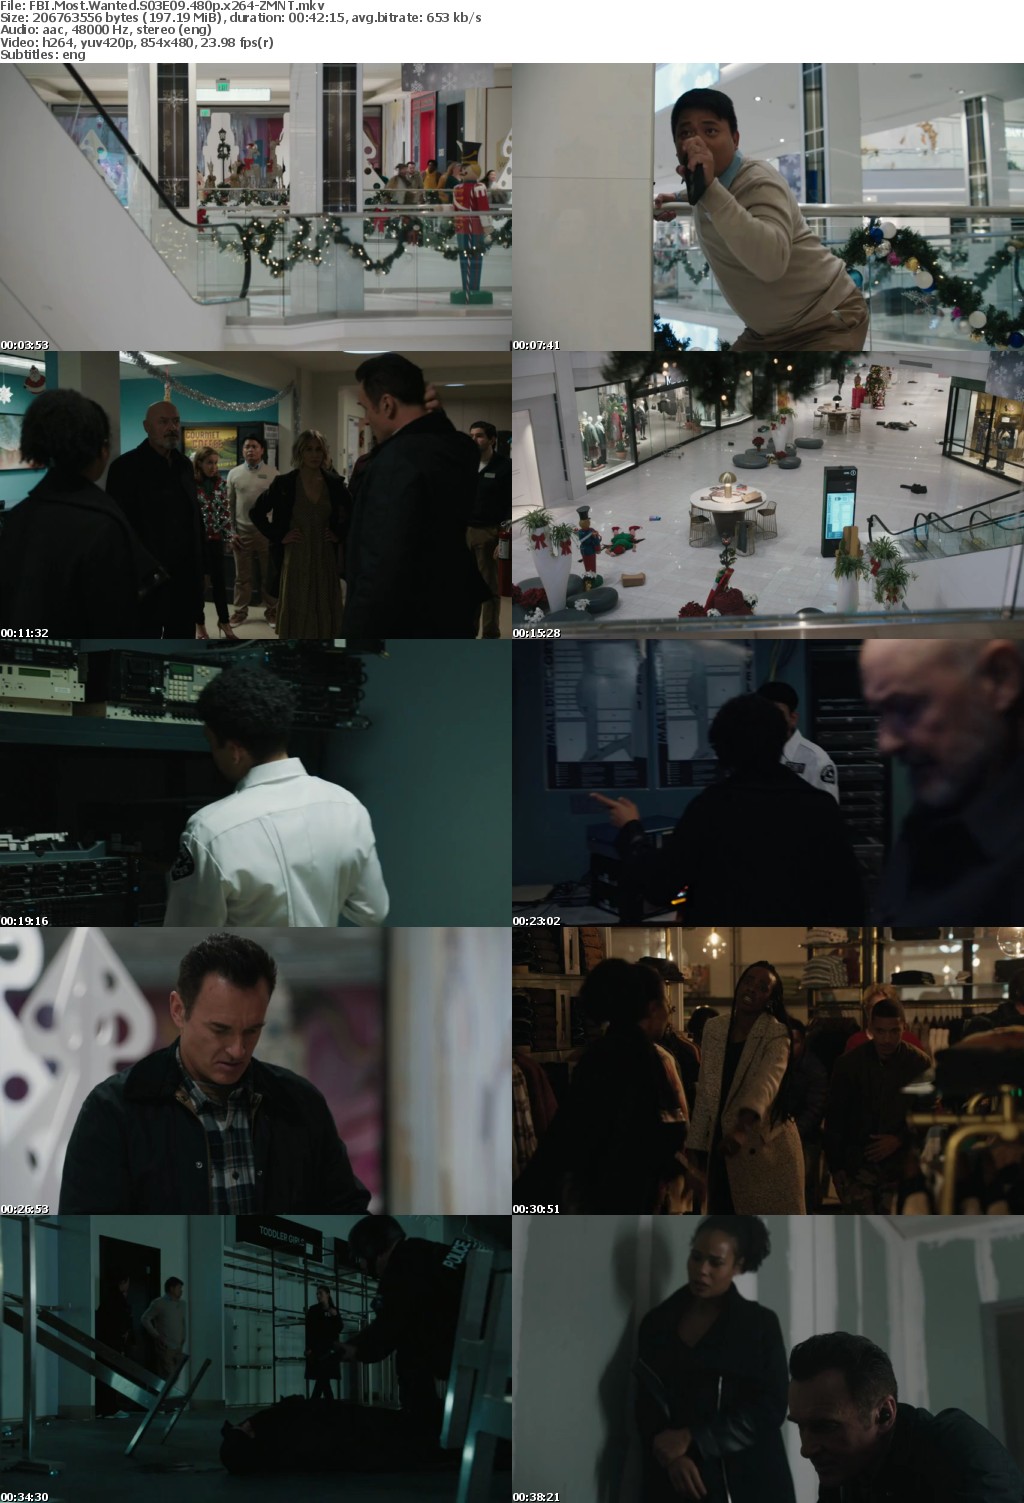 FBI Most Wanted S03E09 480p x264-ZMNT